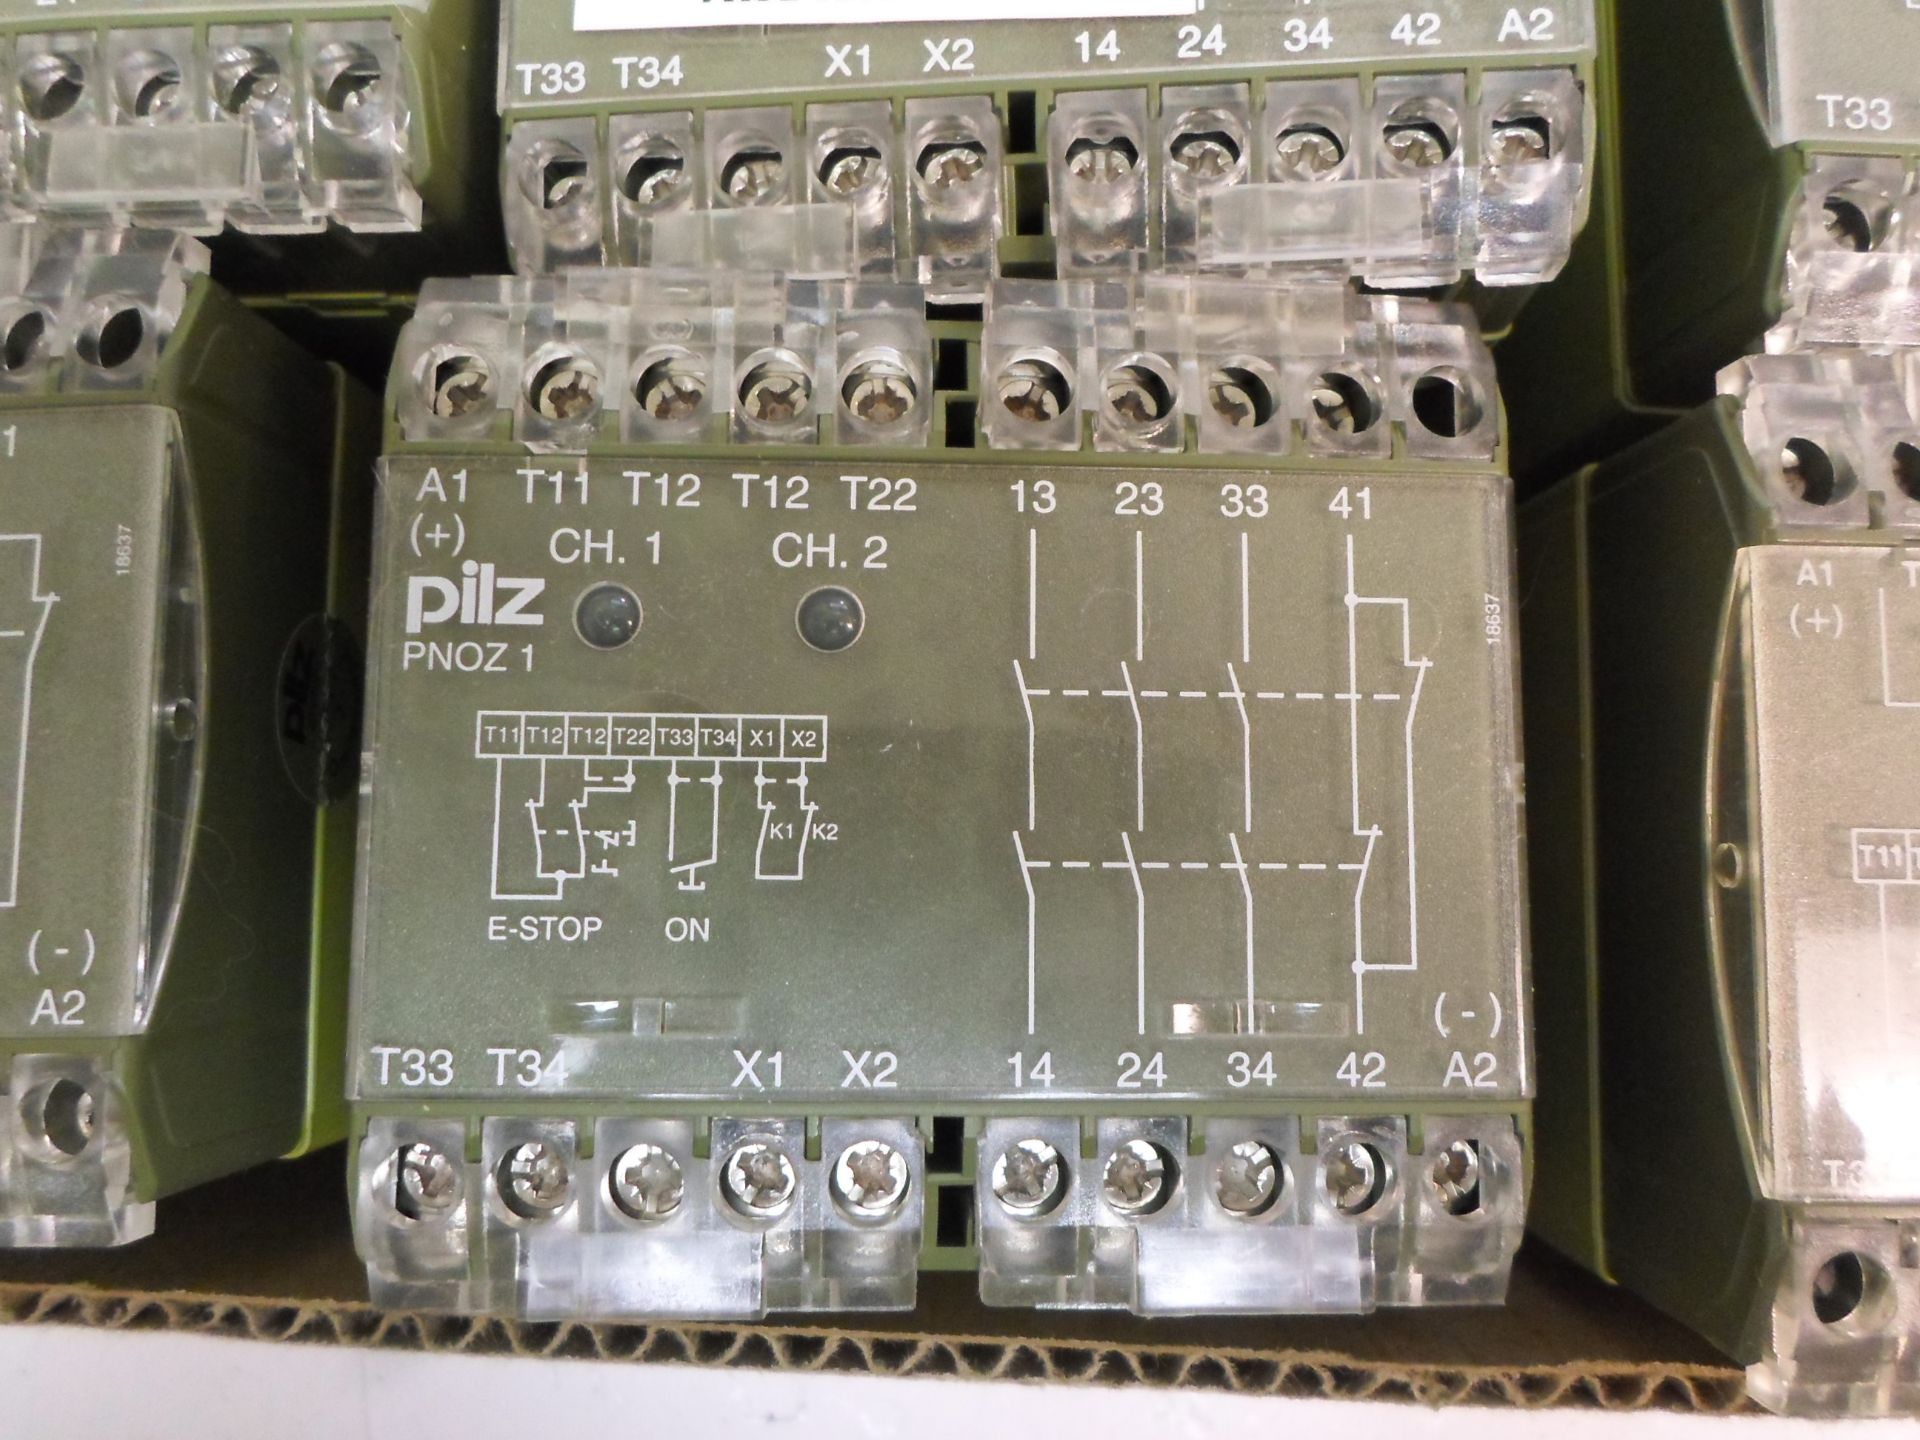 LOT OF EIGHT (6) PILZ PNOZ 24VDC 3S SAFETY RELAY (1) Pilz X2.8P Safety Relay 24 Vac/DC (1) Pilz X1 - Image 2 of 5